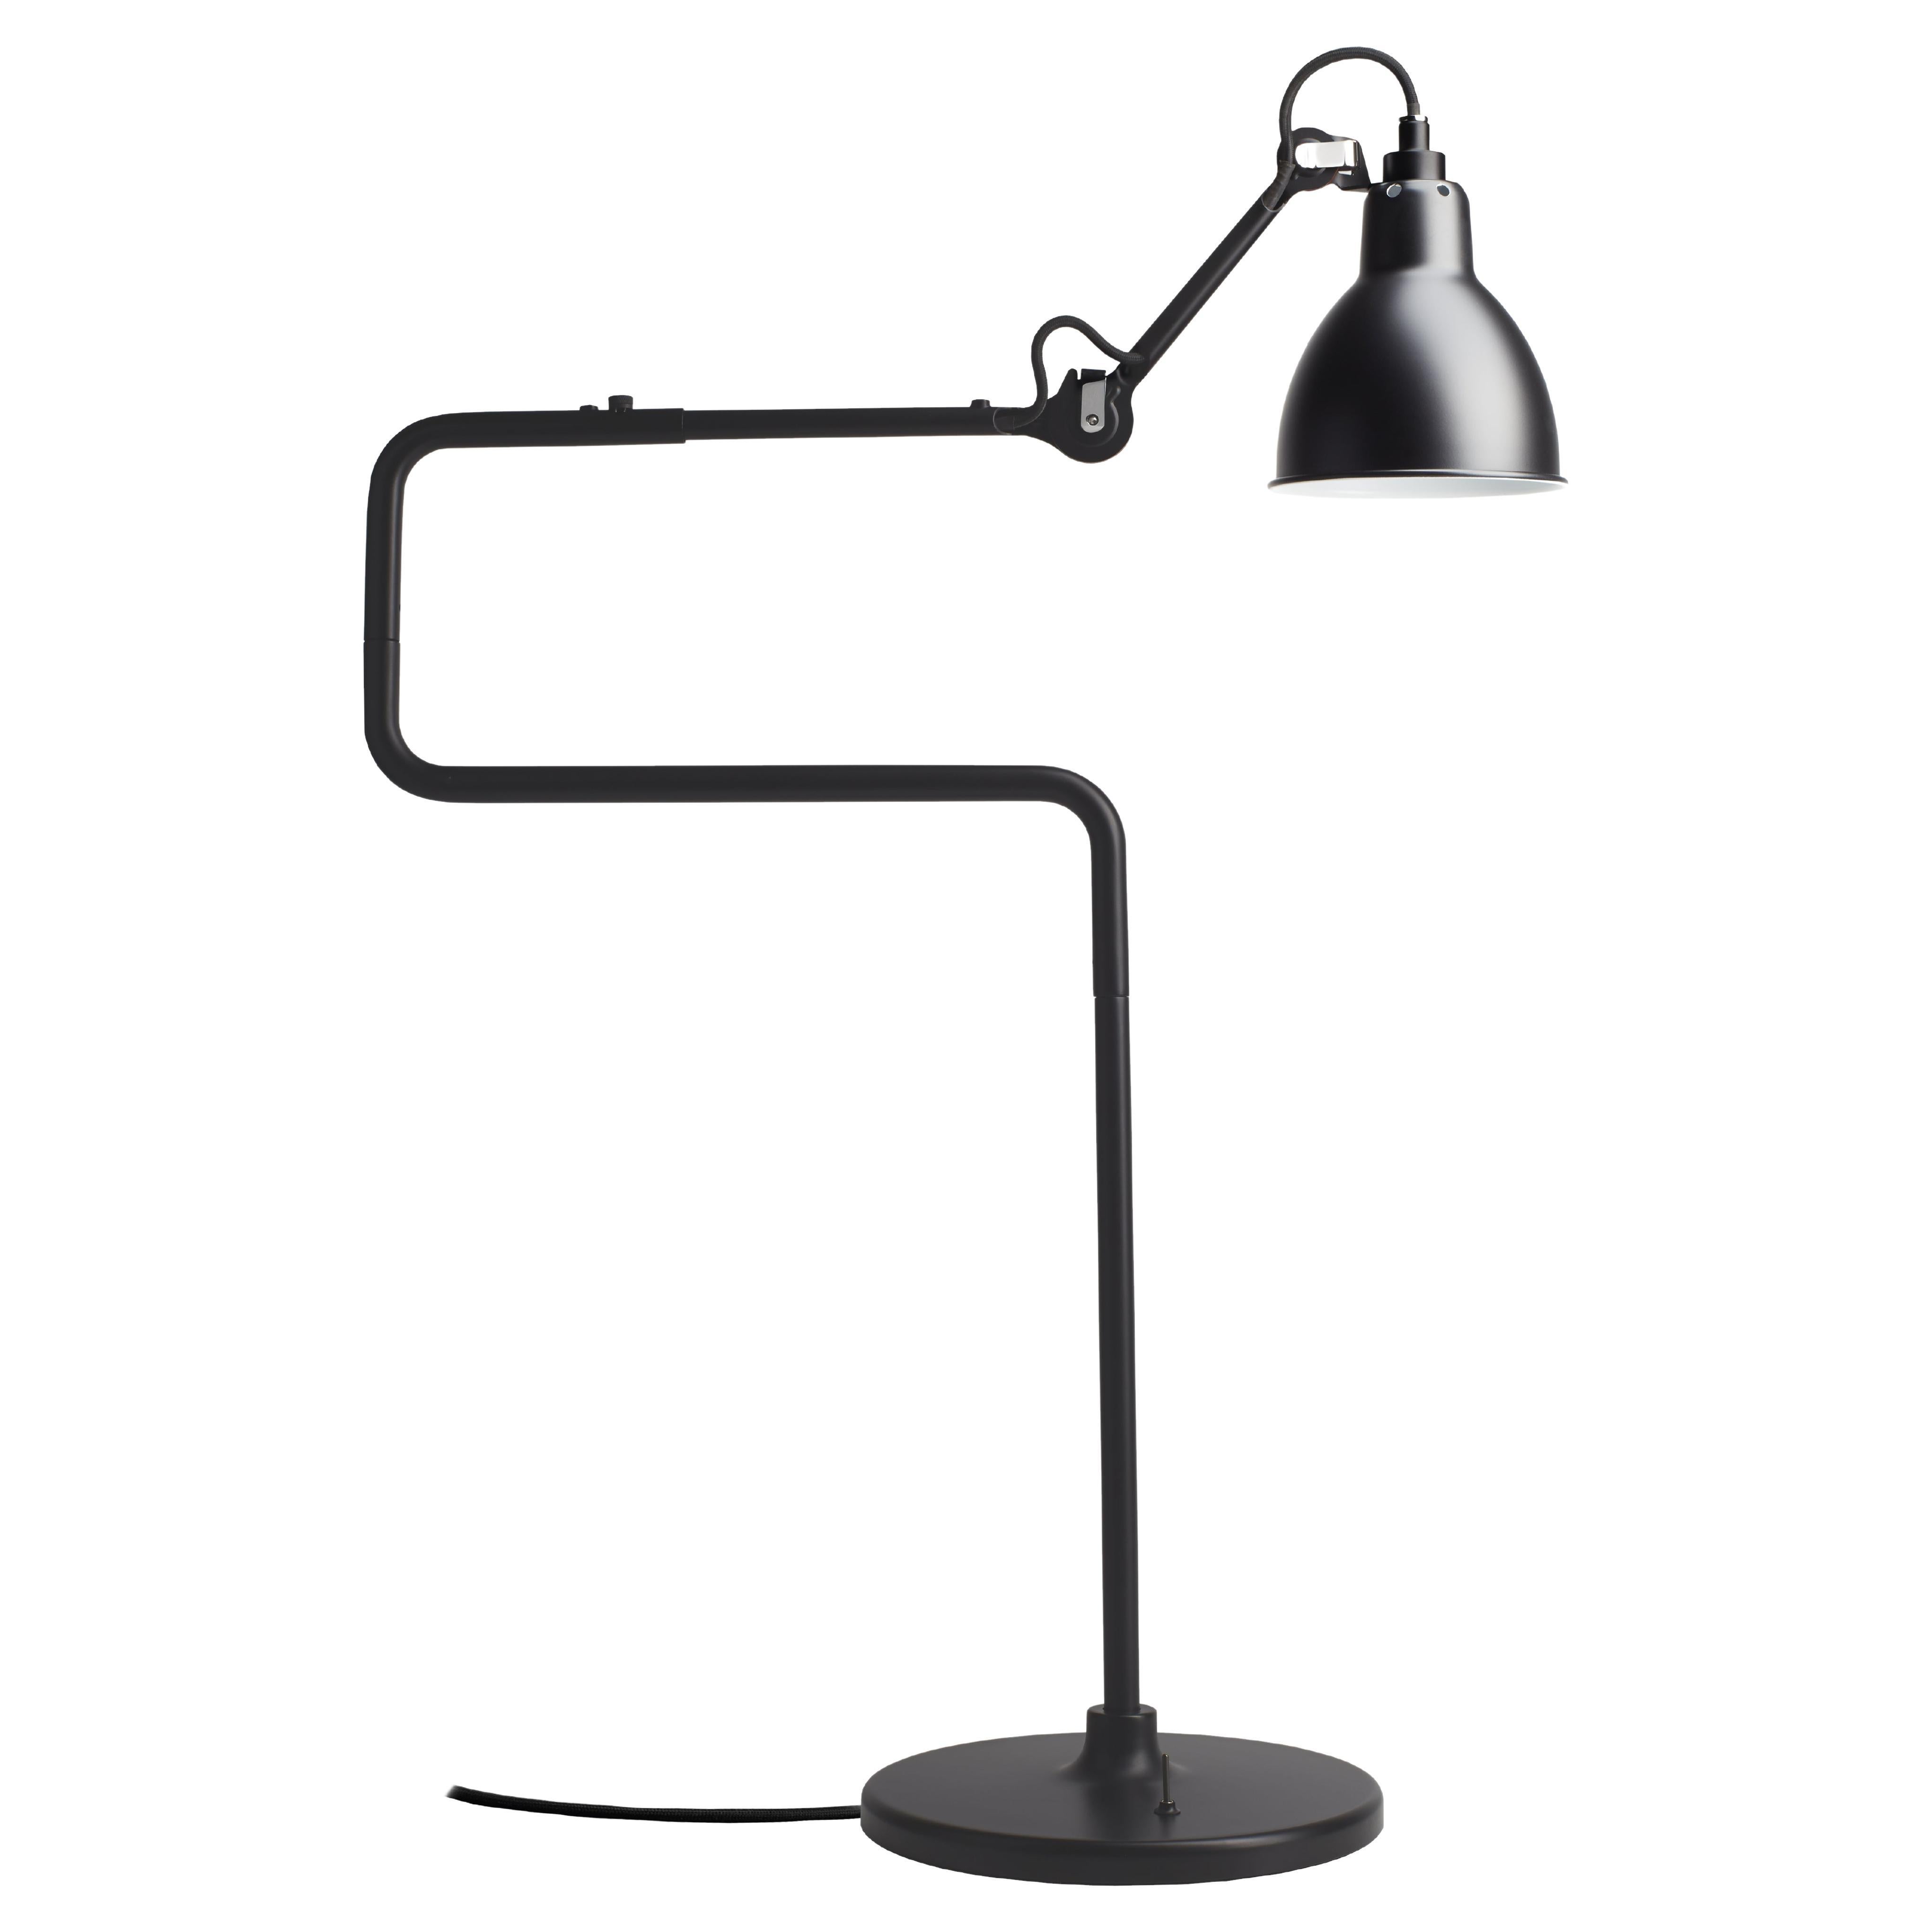 DCW Editions La Lampe Gras N°317 Table Lamp in Black Arm with Black Shade For Sale